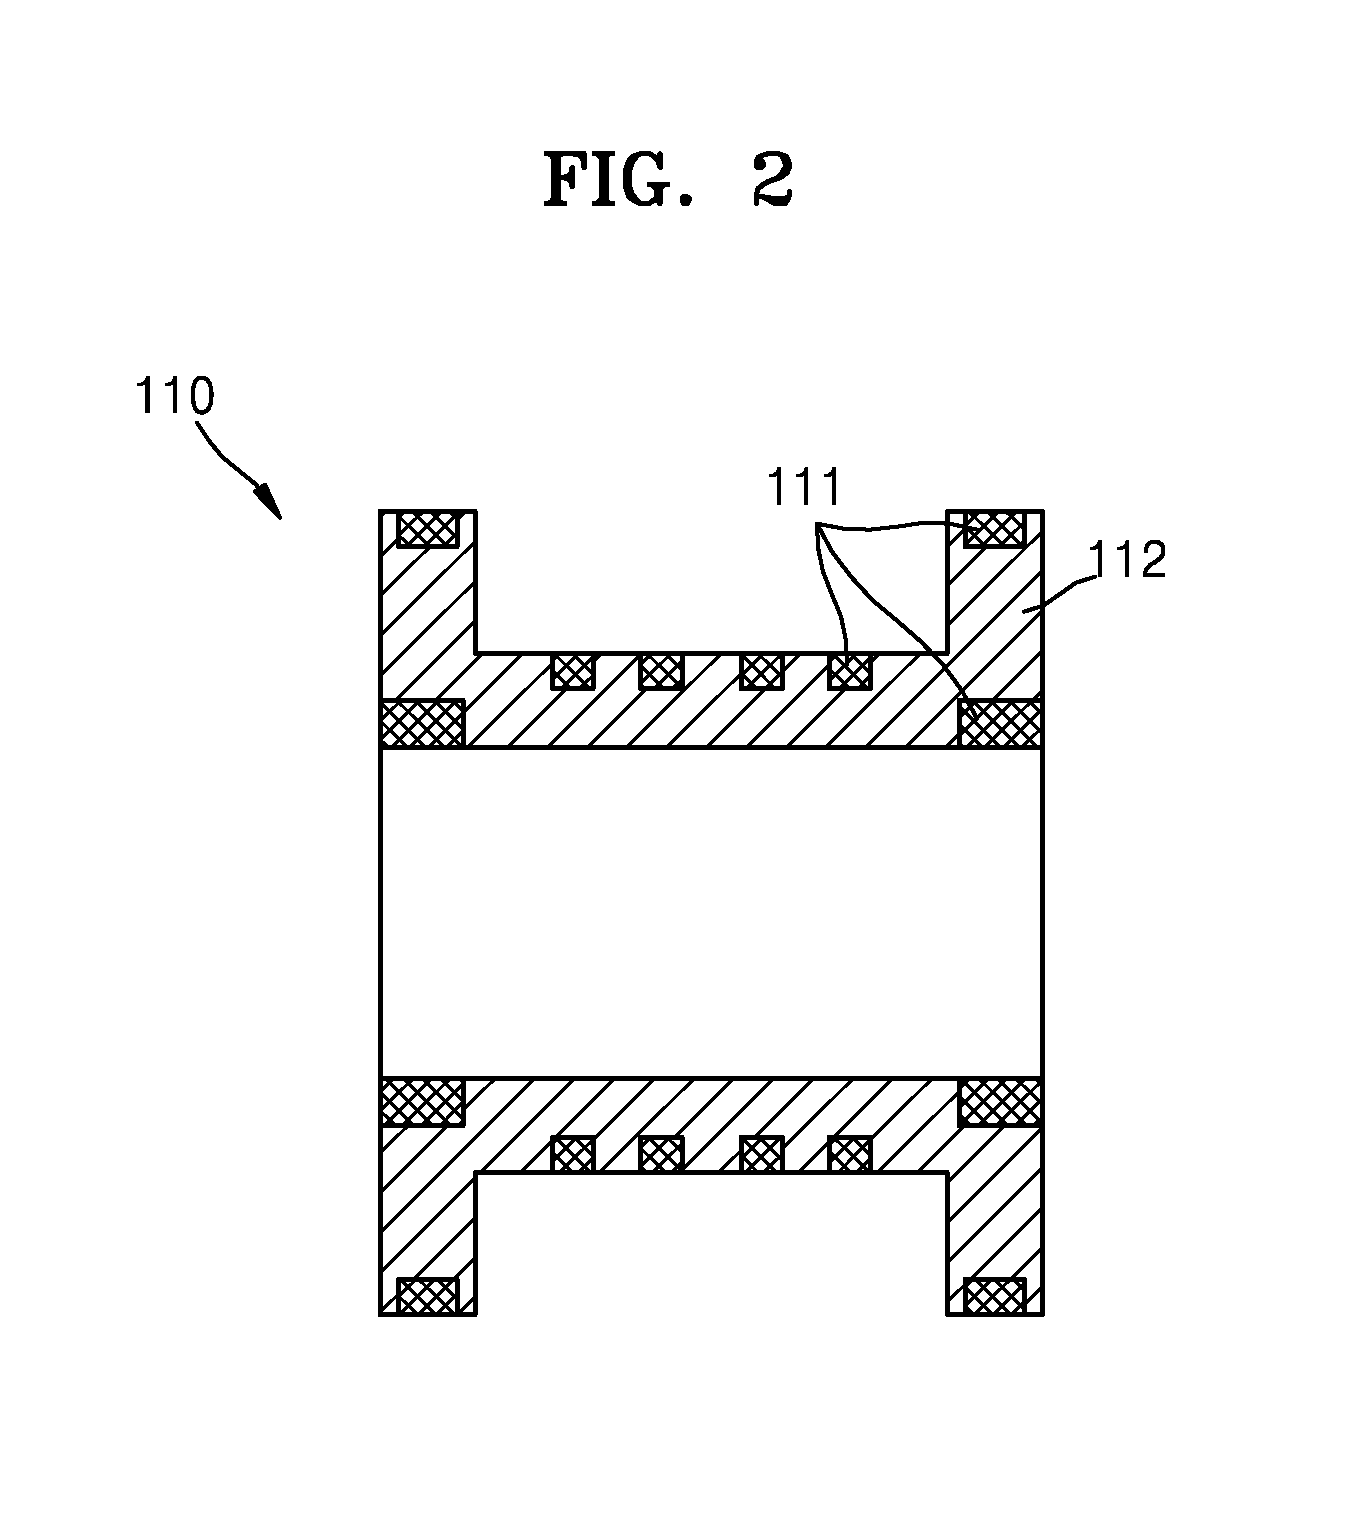 Cryogen recondensing system and superconducting magnet apparatus including the same